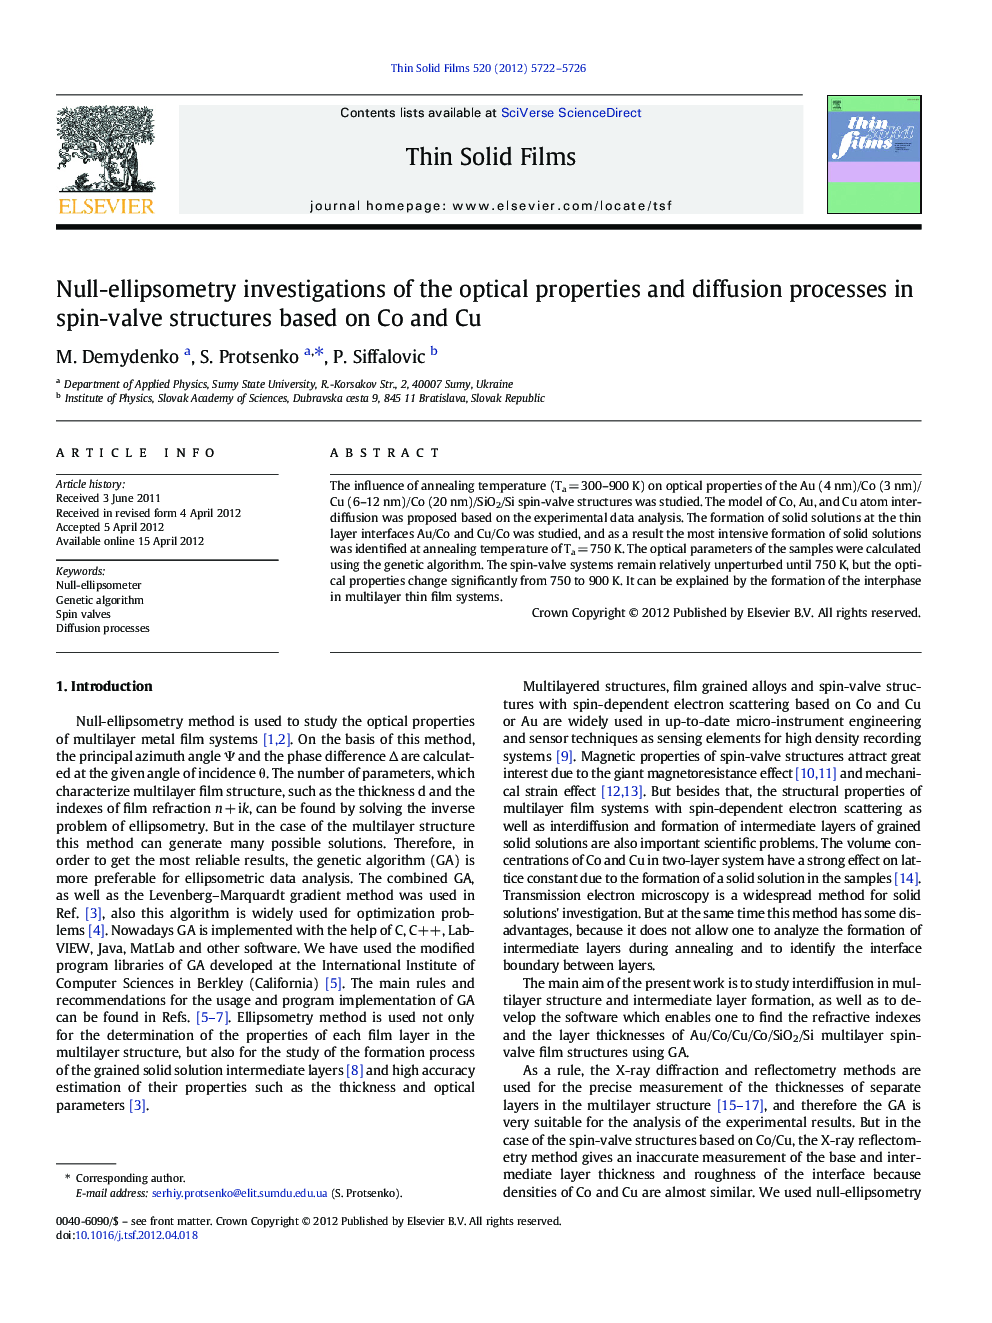 Null-ellipsometry investigations of the optical properties and diffusion processes in spin-valve structures based on Co and Cu